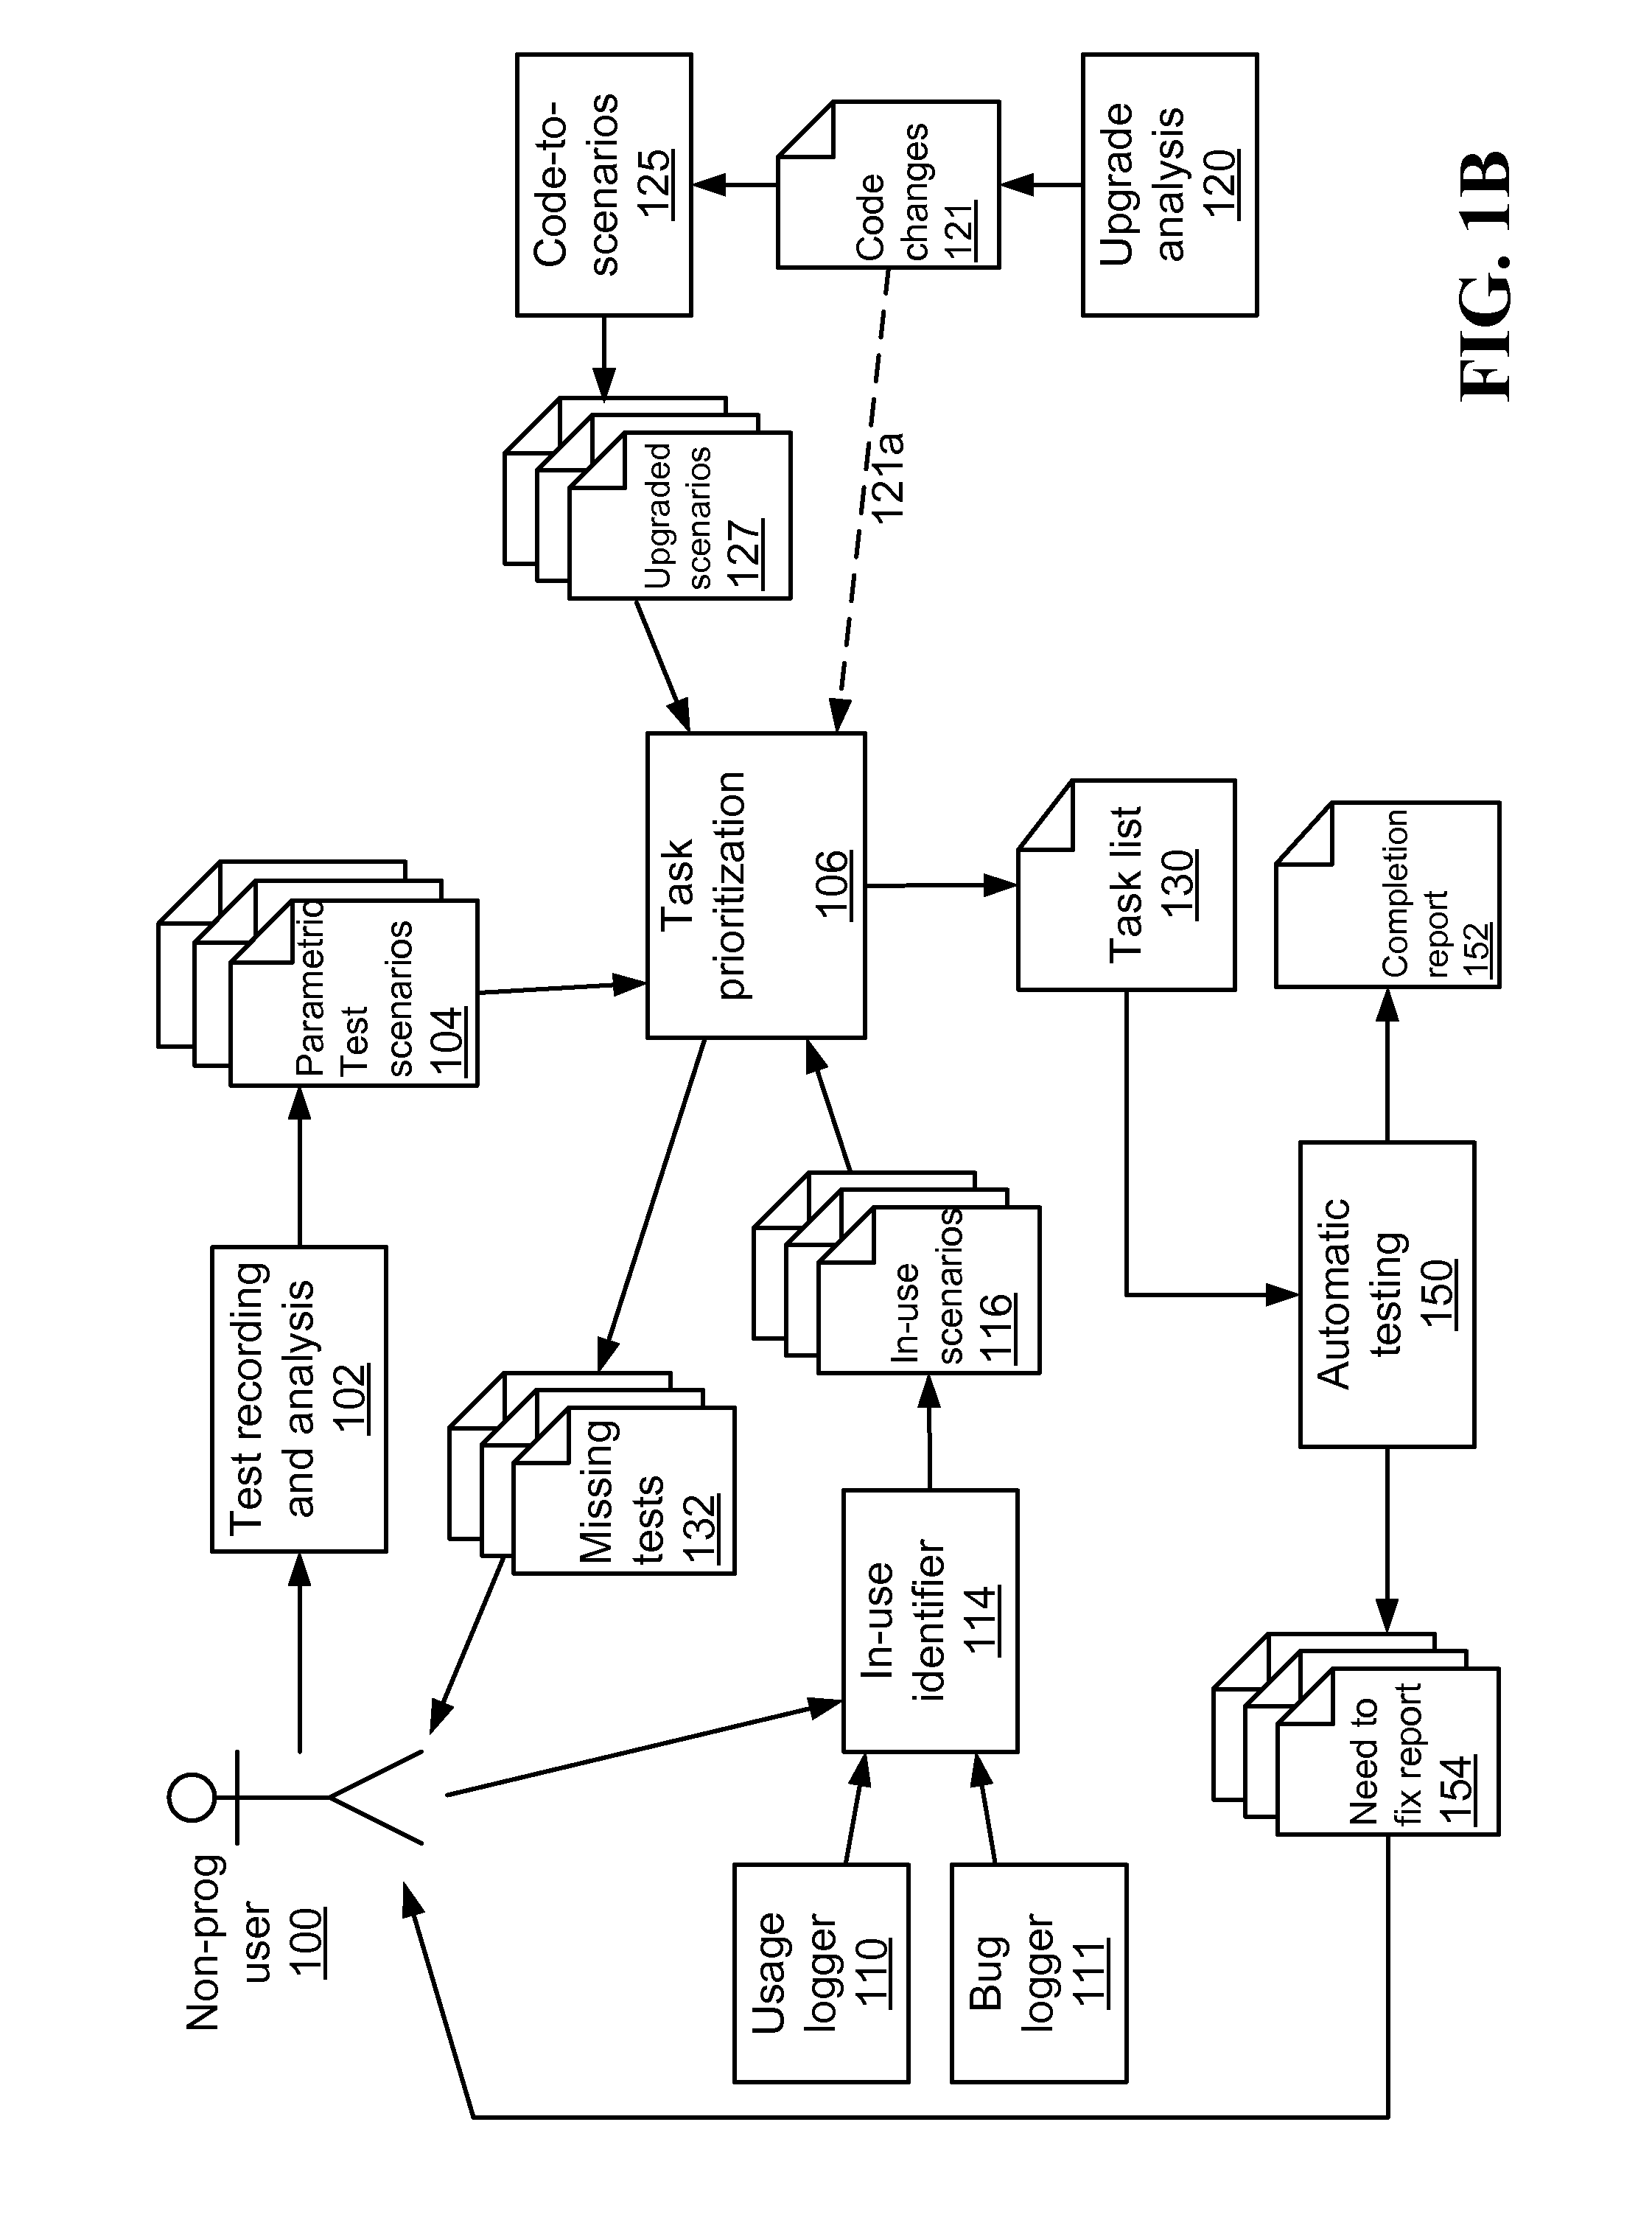 Method and system for semiautomatic execution of functioning test scenario